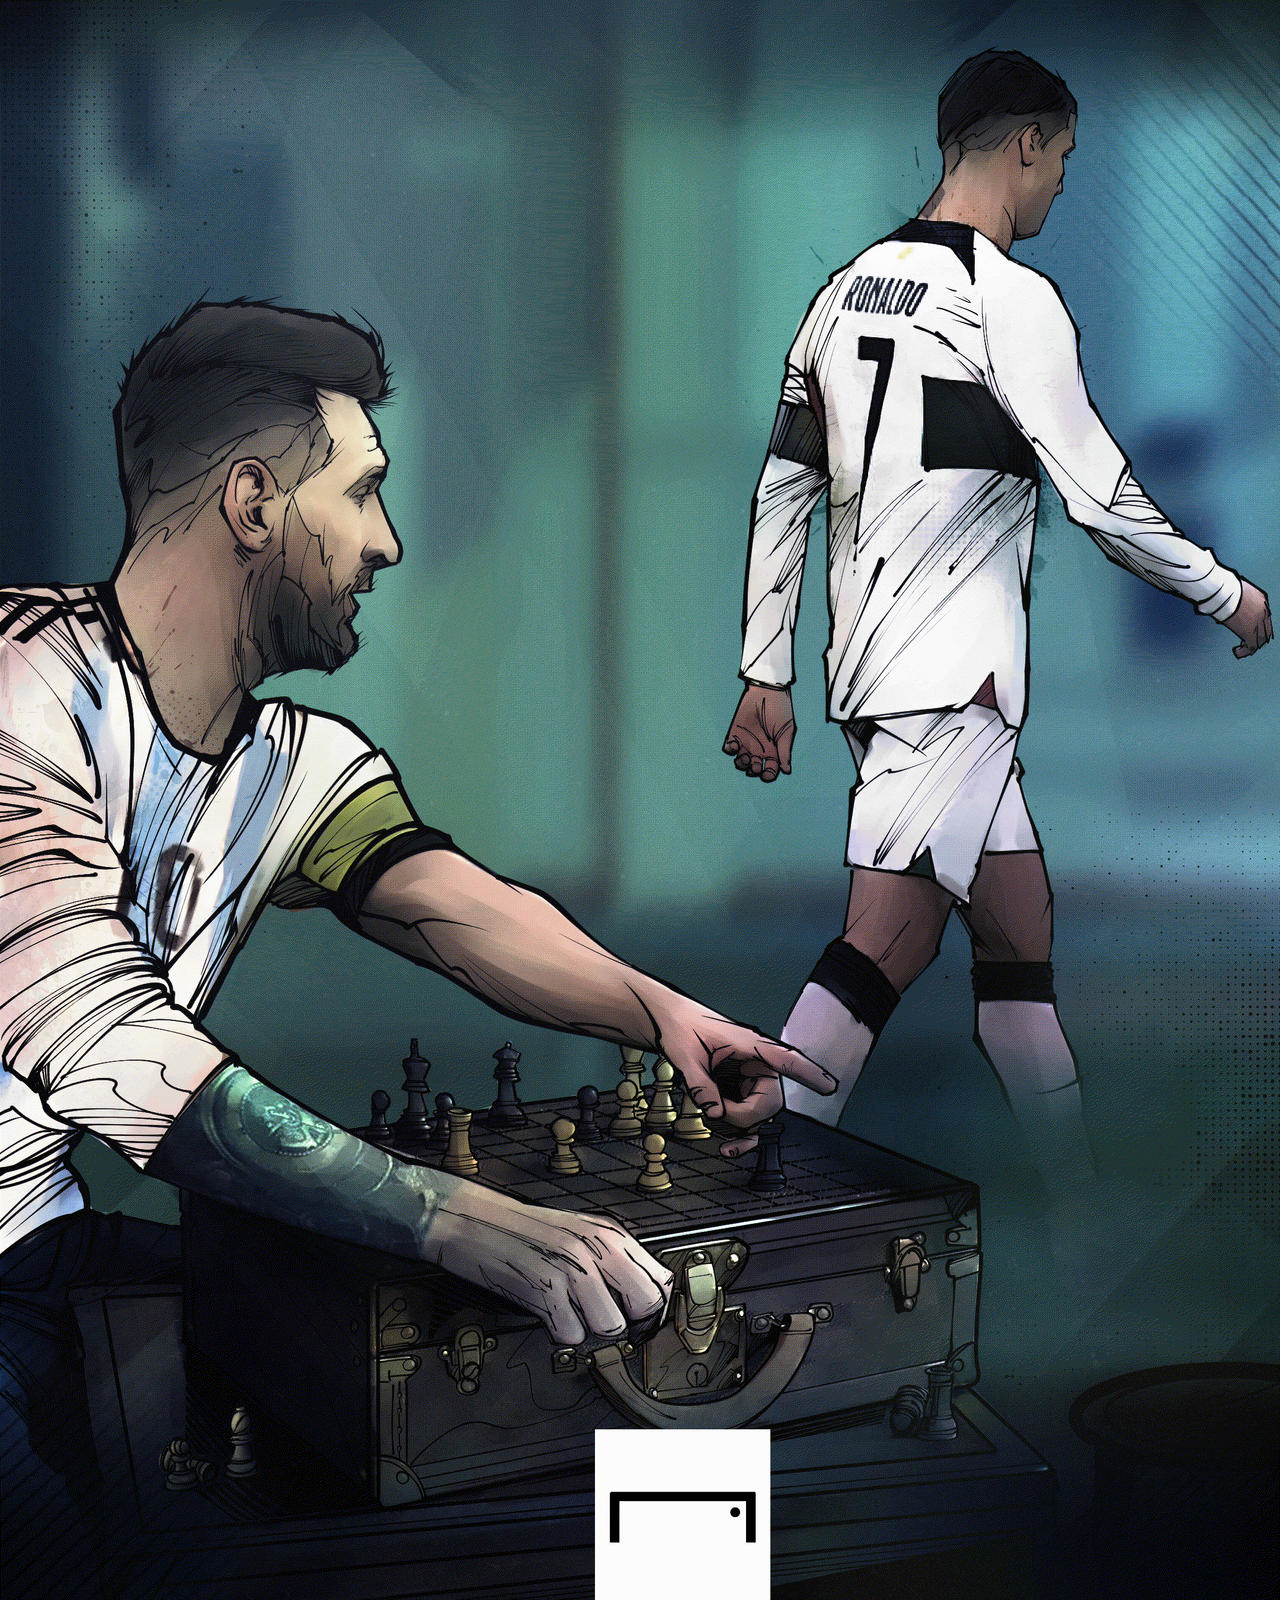 Messi vs Cristiano Chess Board Game by akyanyme on DeviantArt